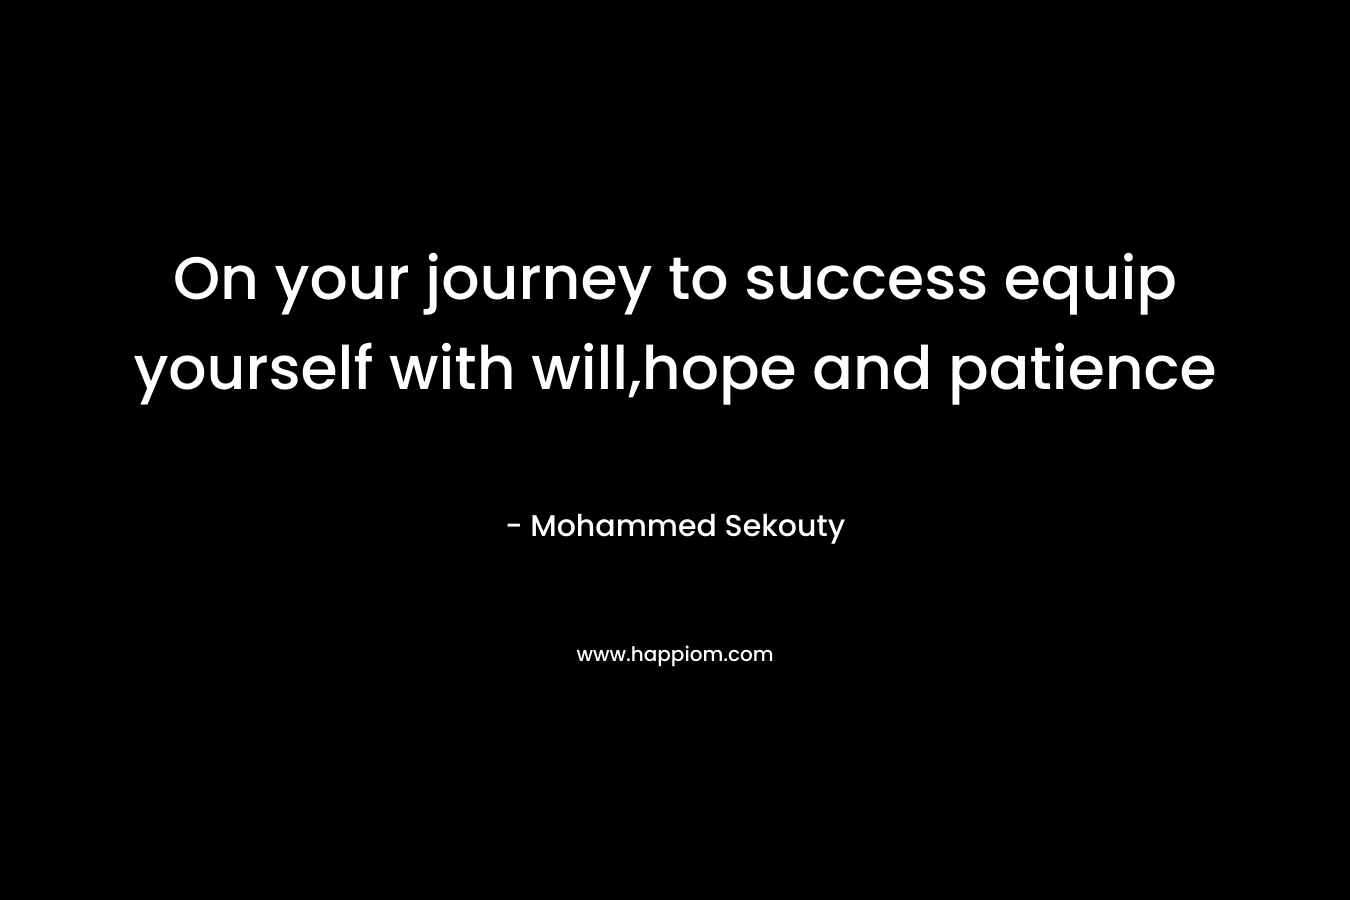 On your journey to success equip yourself with will,hope and patience – Mohammed Sekouty